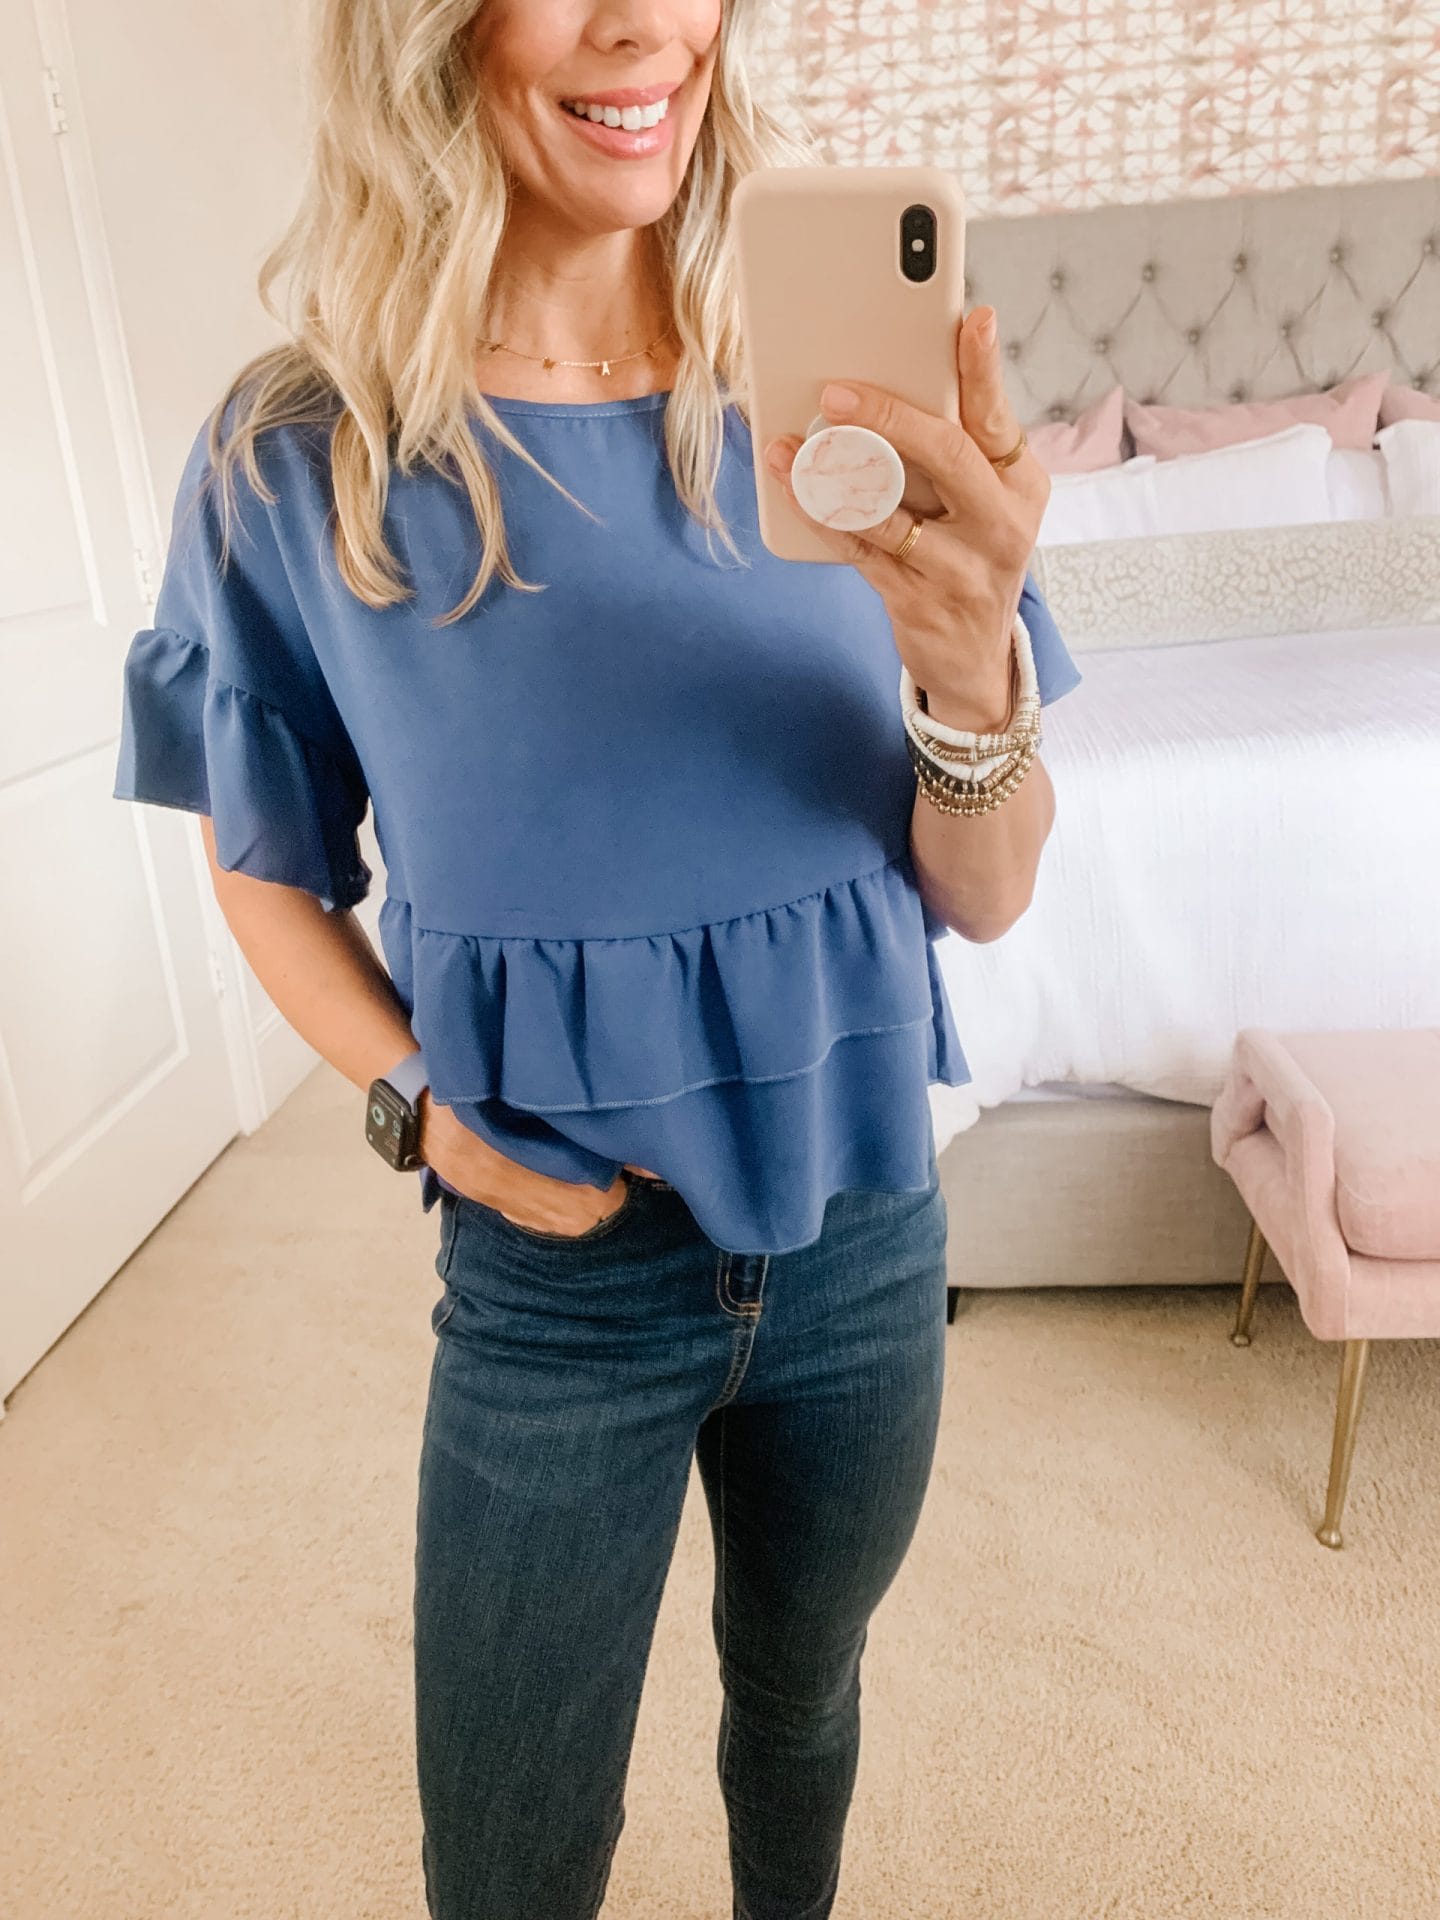 Amazon Fashion, Blue Peplum Top, Jeans, and Mules 